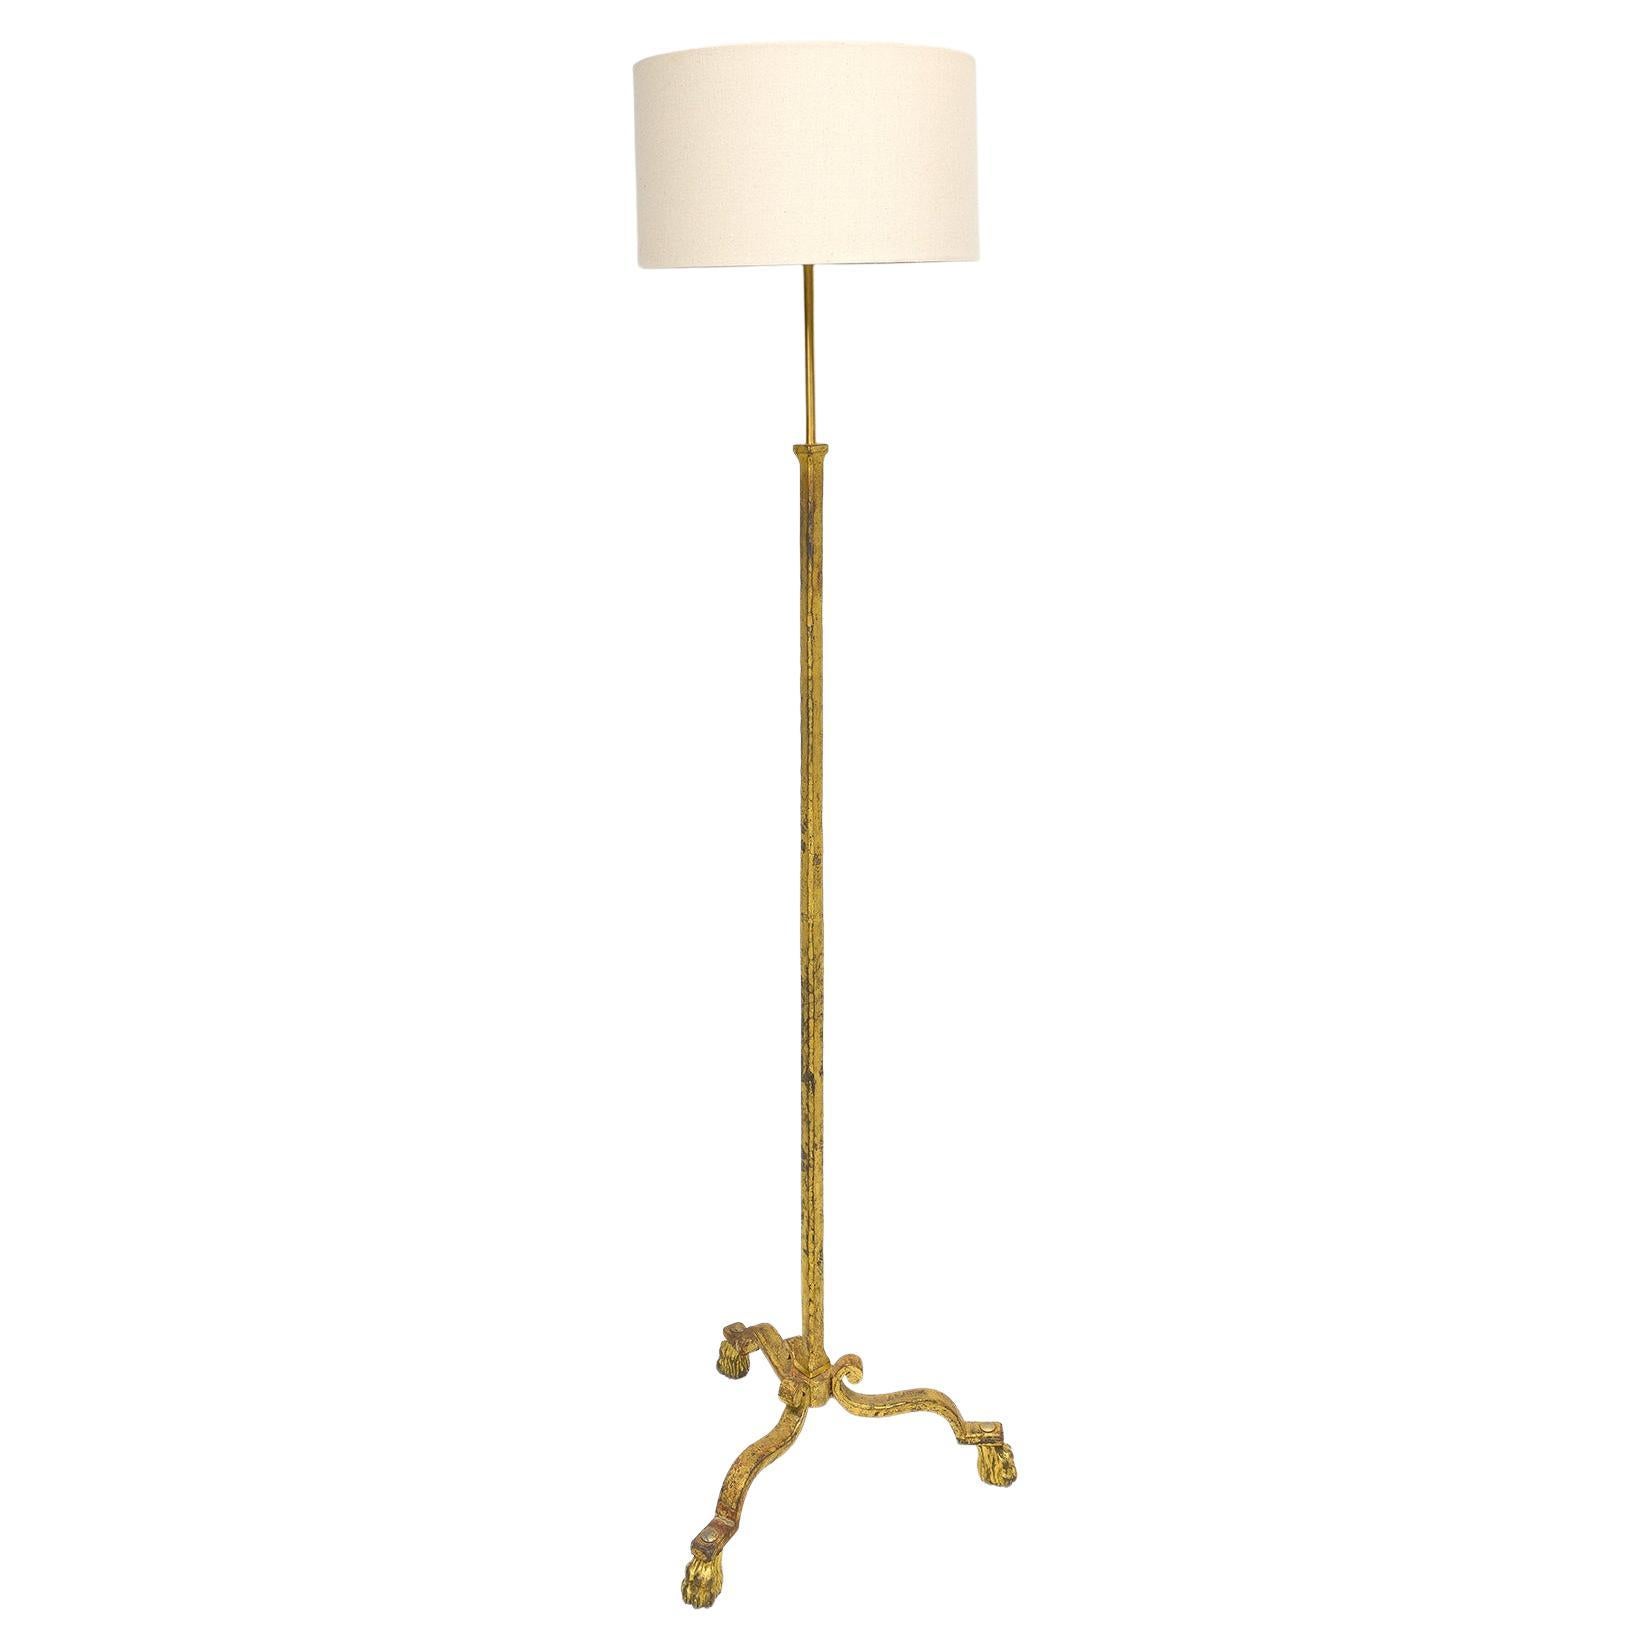 French Vintage Gilt Wrought Iron Floor Lamp For Sale